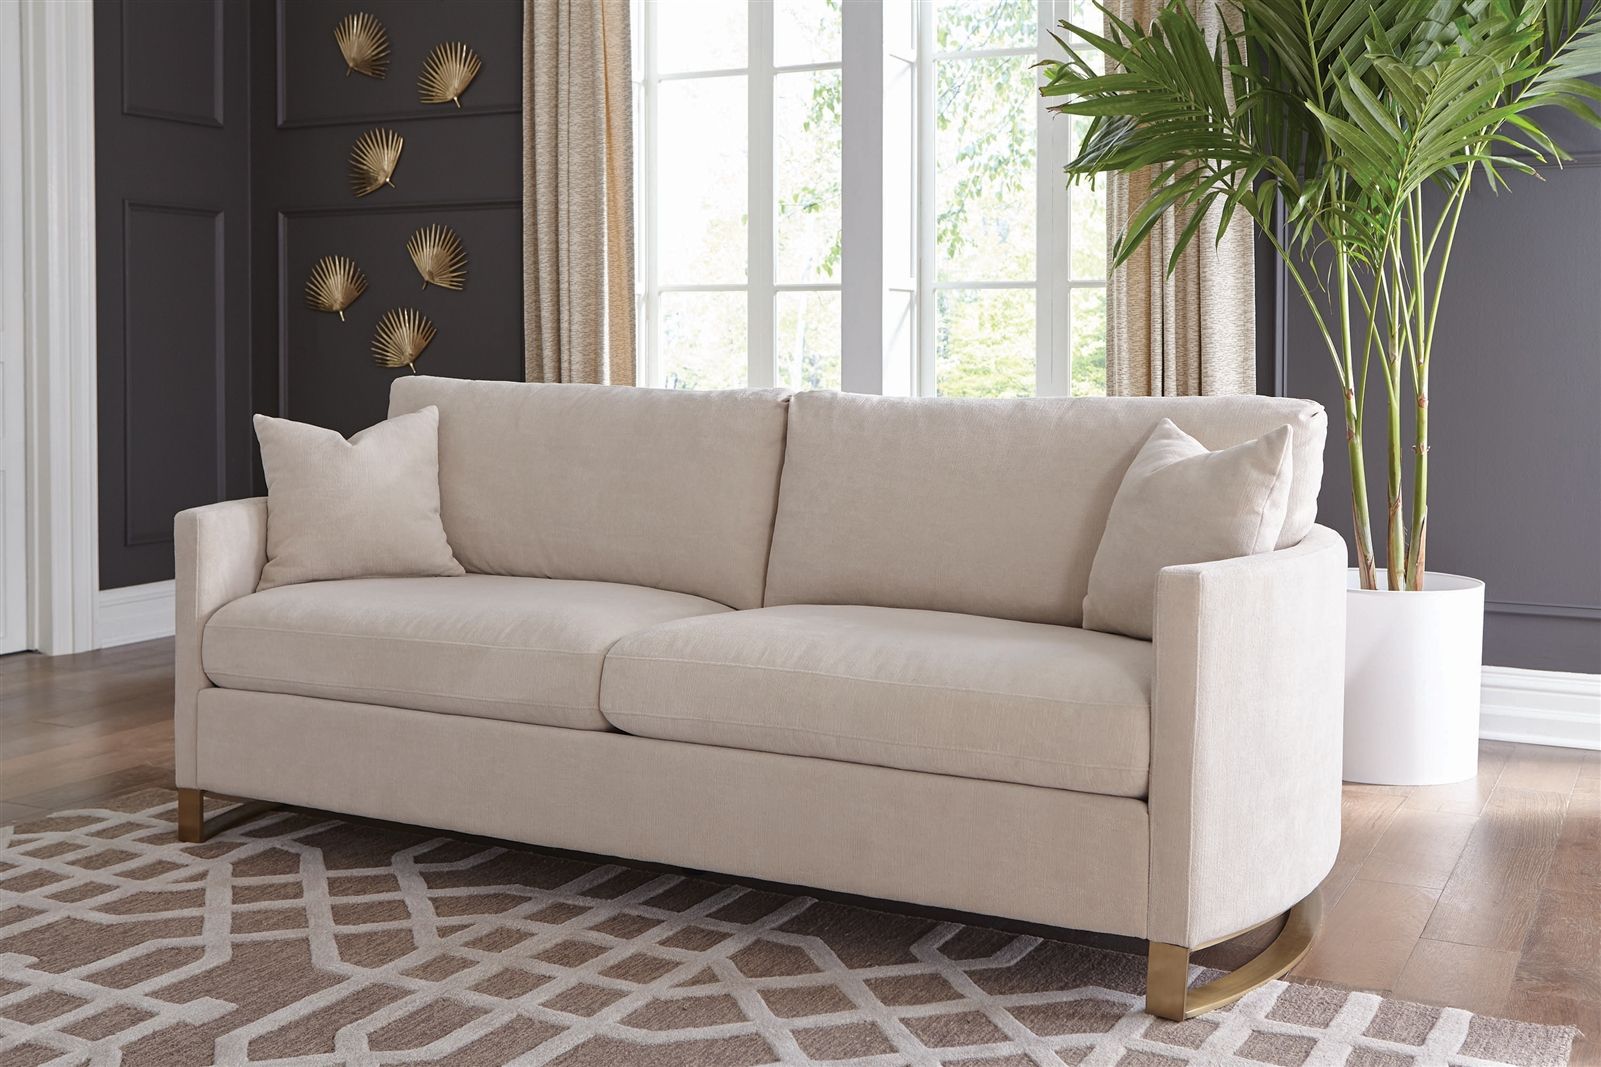 Beige Textured Chenille Upholstered Sofa With Brass Legs Pertaining To Ecru And Otter Console Tables (Photo 6 of 20)